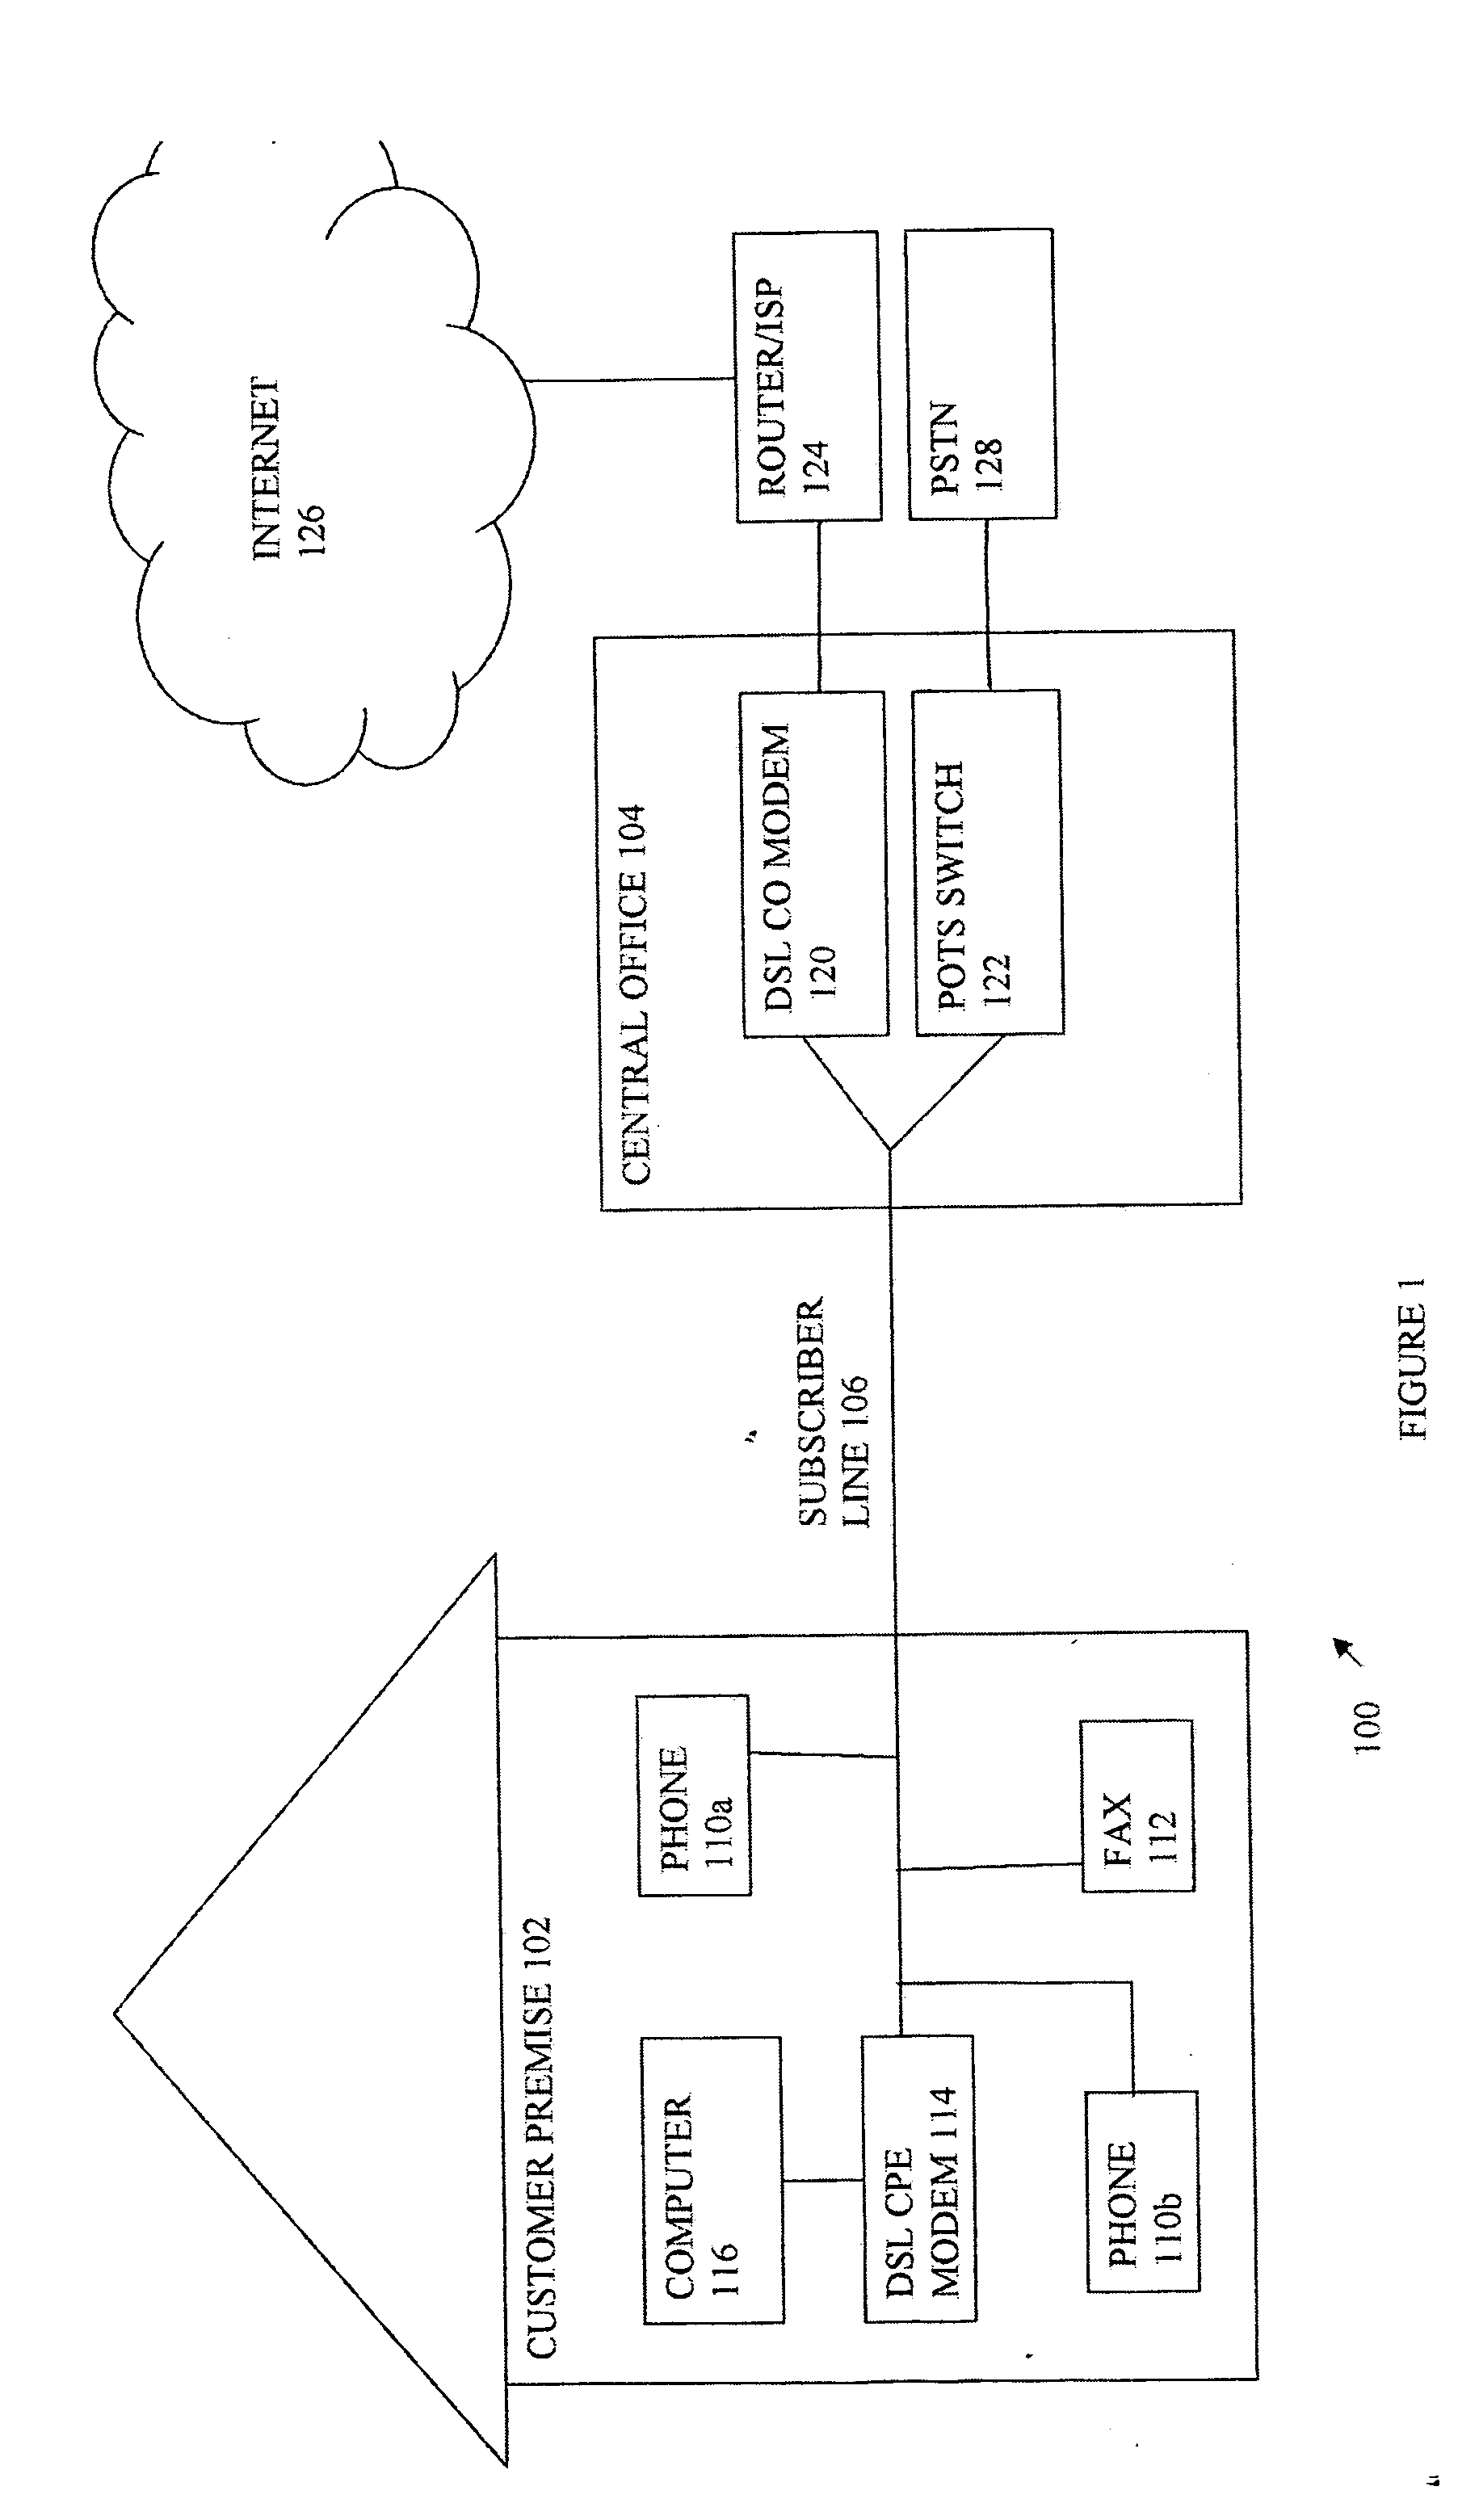 System and method for bit-reversing and scrambling payload bytes in an asynchronous transfer mode cell